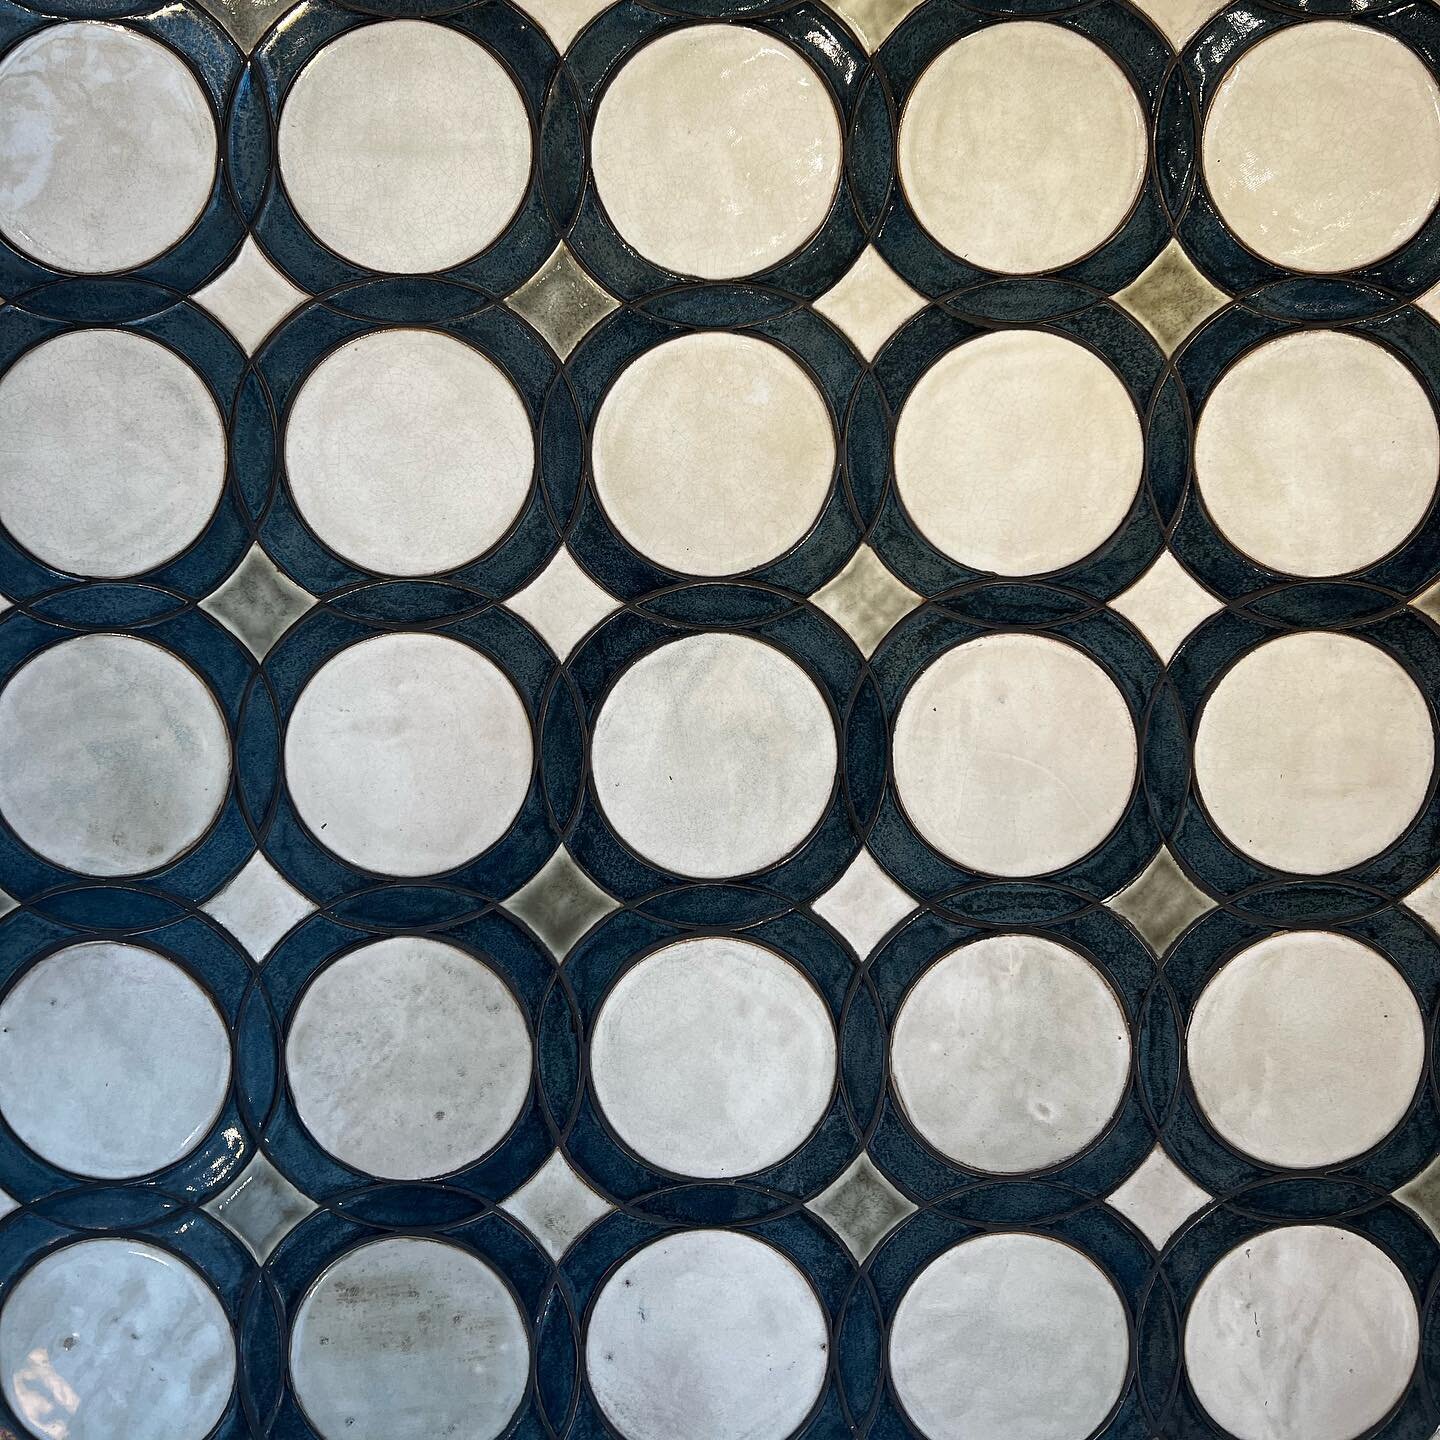 Our circle patterned tile in a cream and black glaze combination. #circles